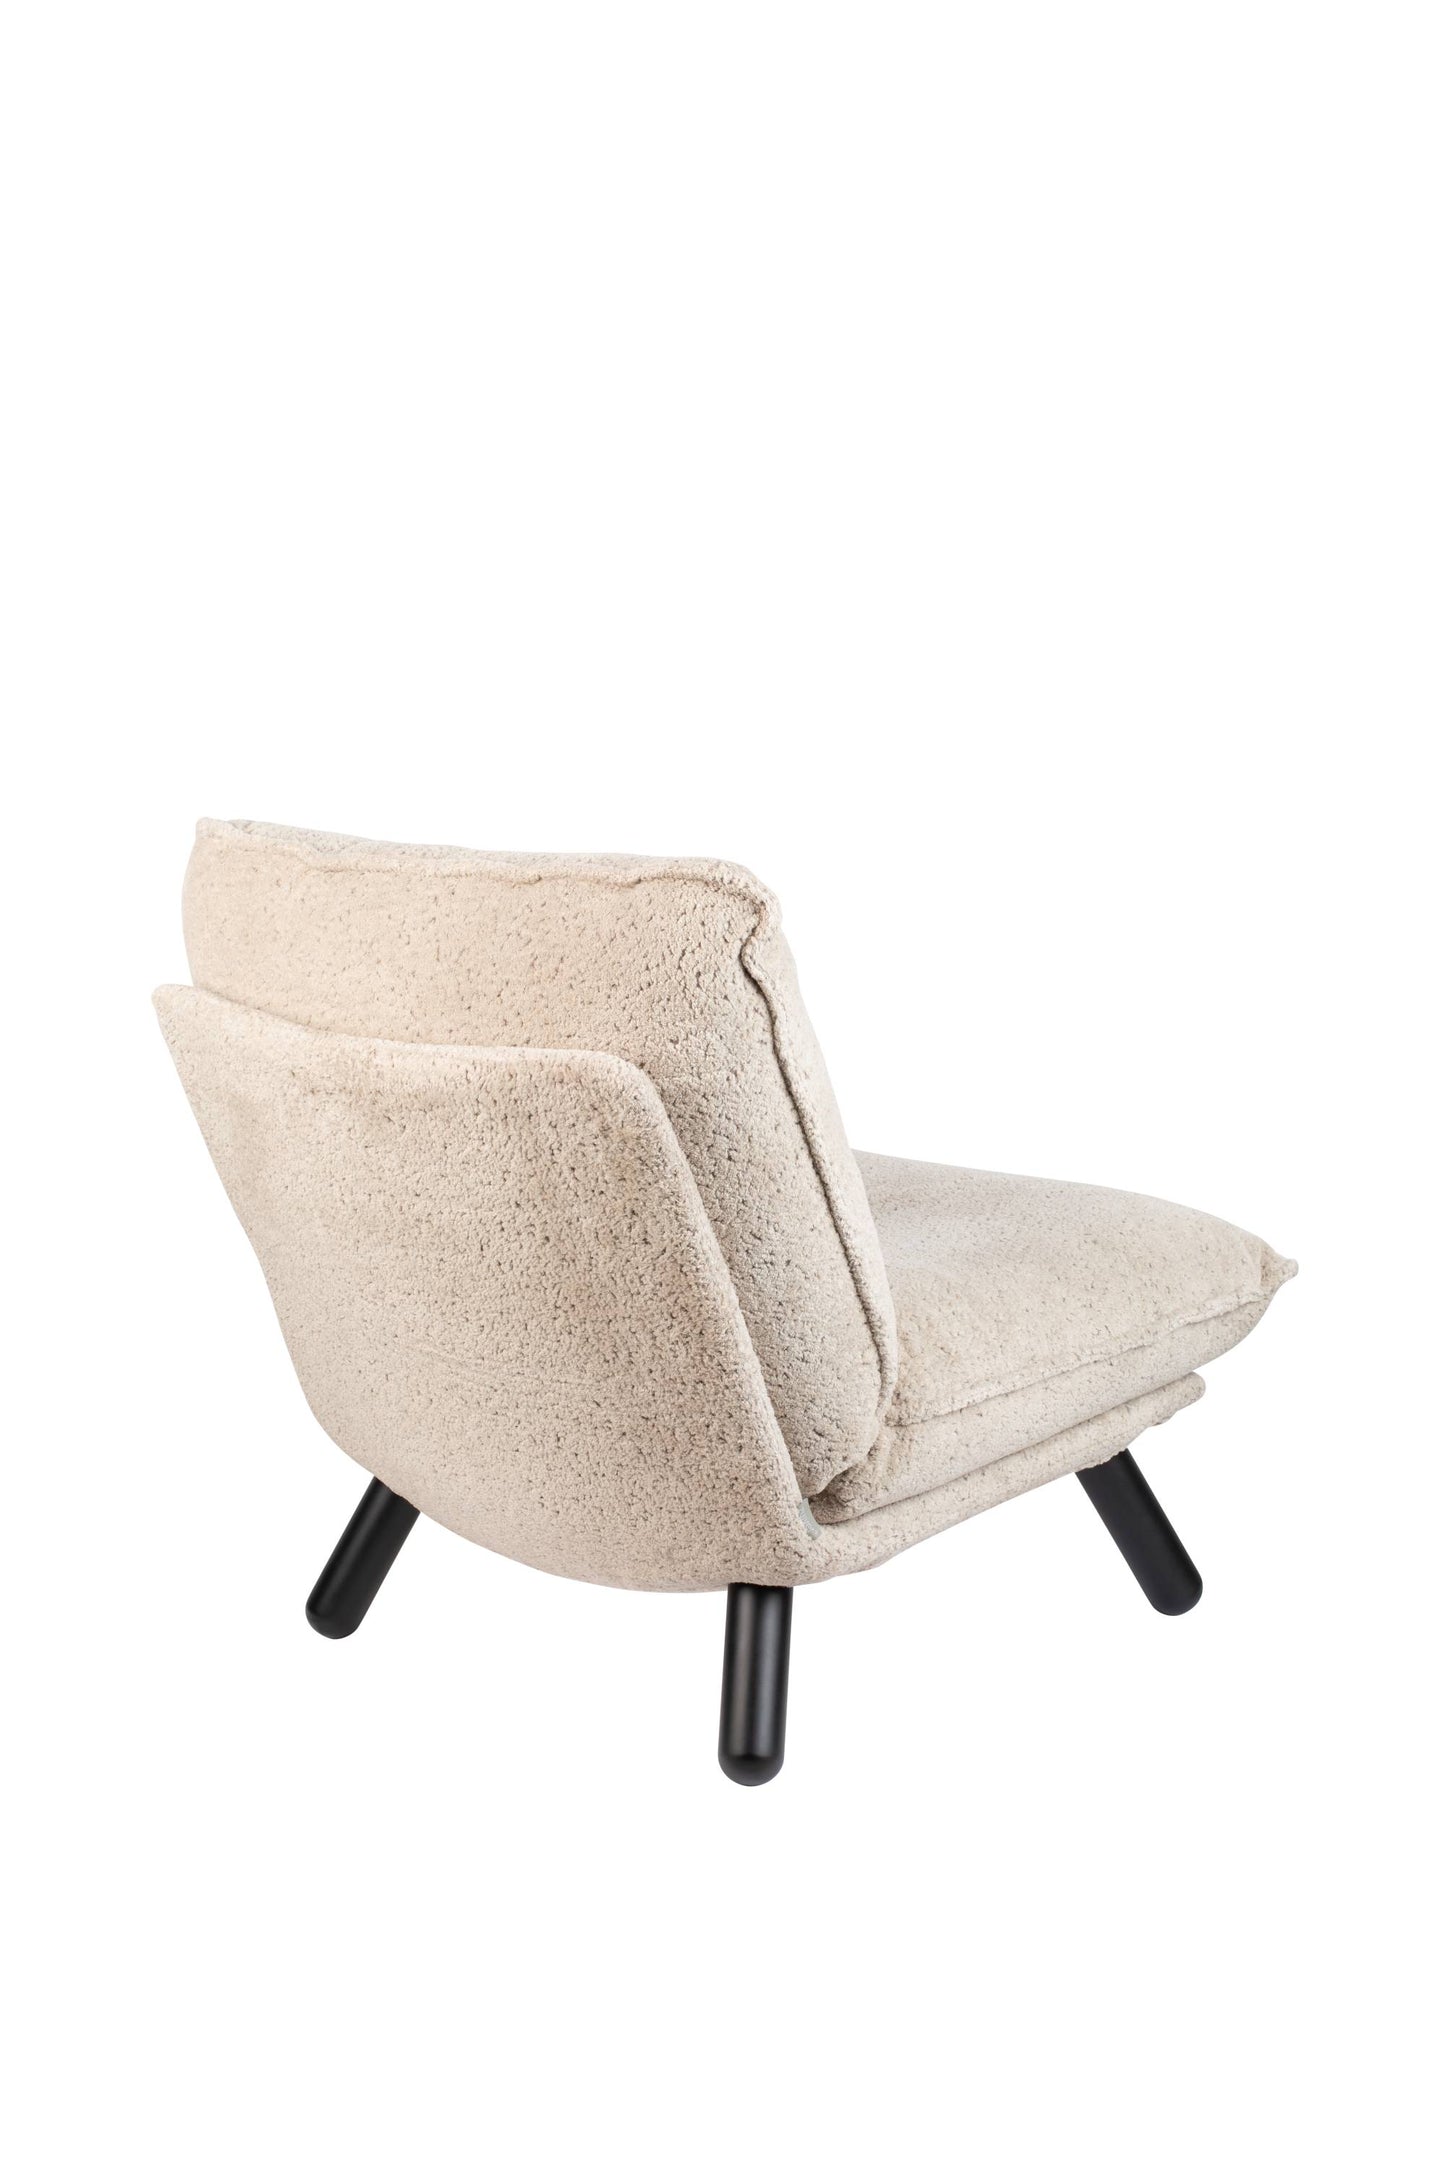 Zuiver | LOUNGE CHAIR LAZY SACK TEDDY Default Title